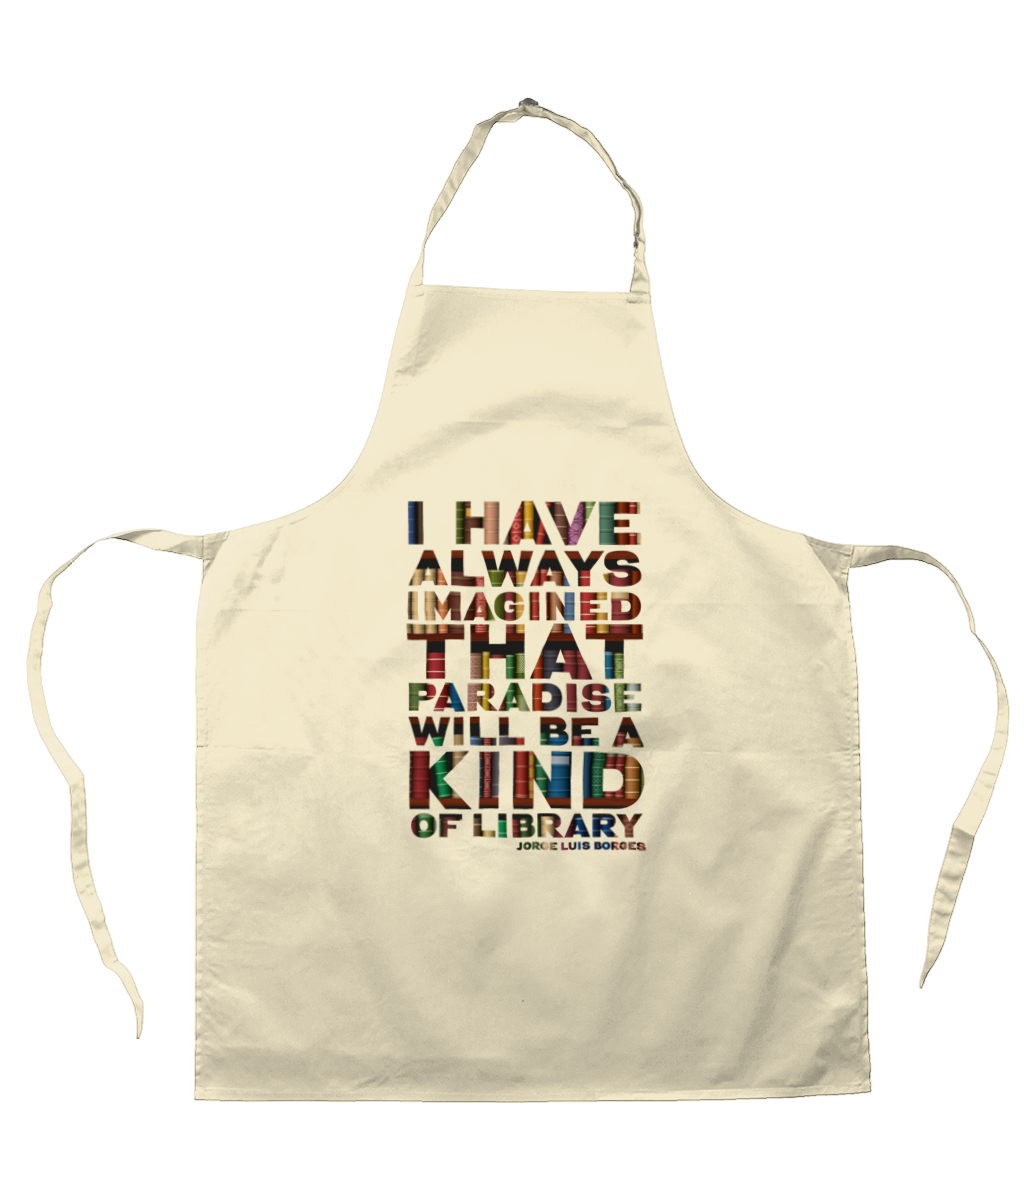 Book lover apron "I have always imagined that paradise will be a kind of library", gift for Book lover, gift for bookworm, gift for book club